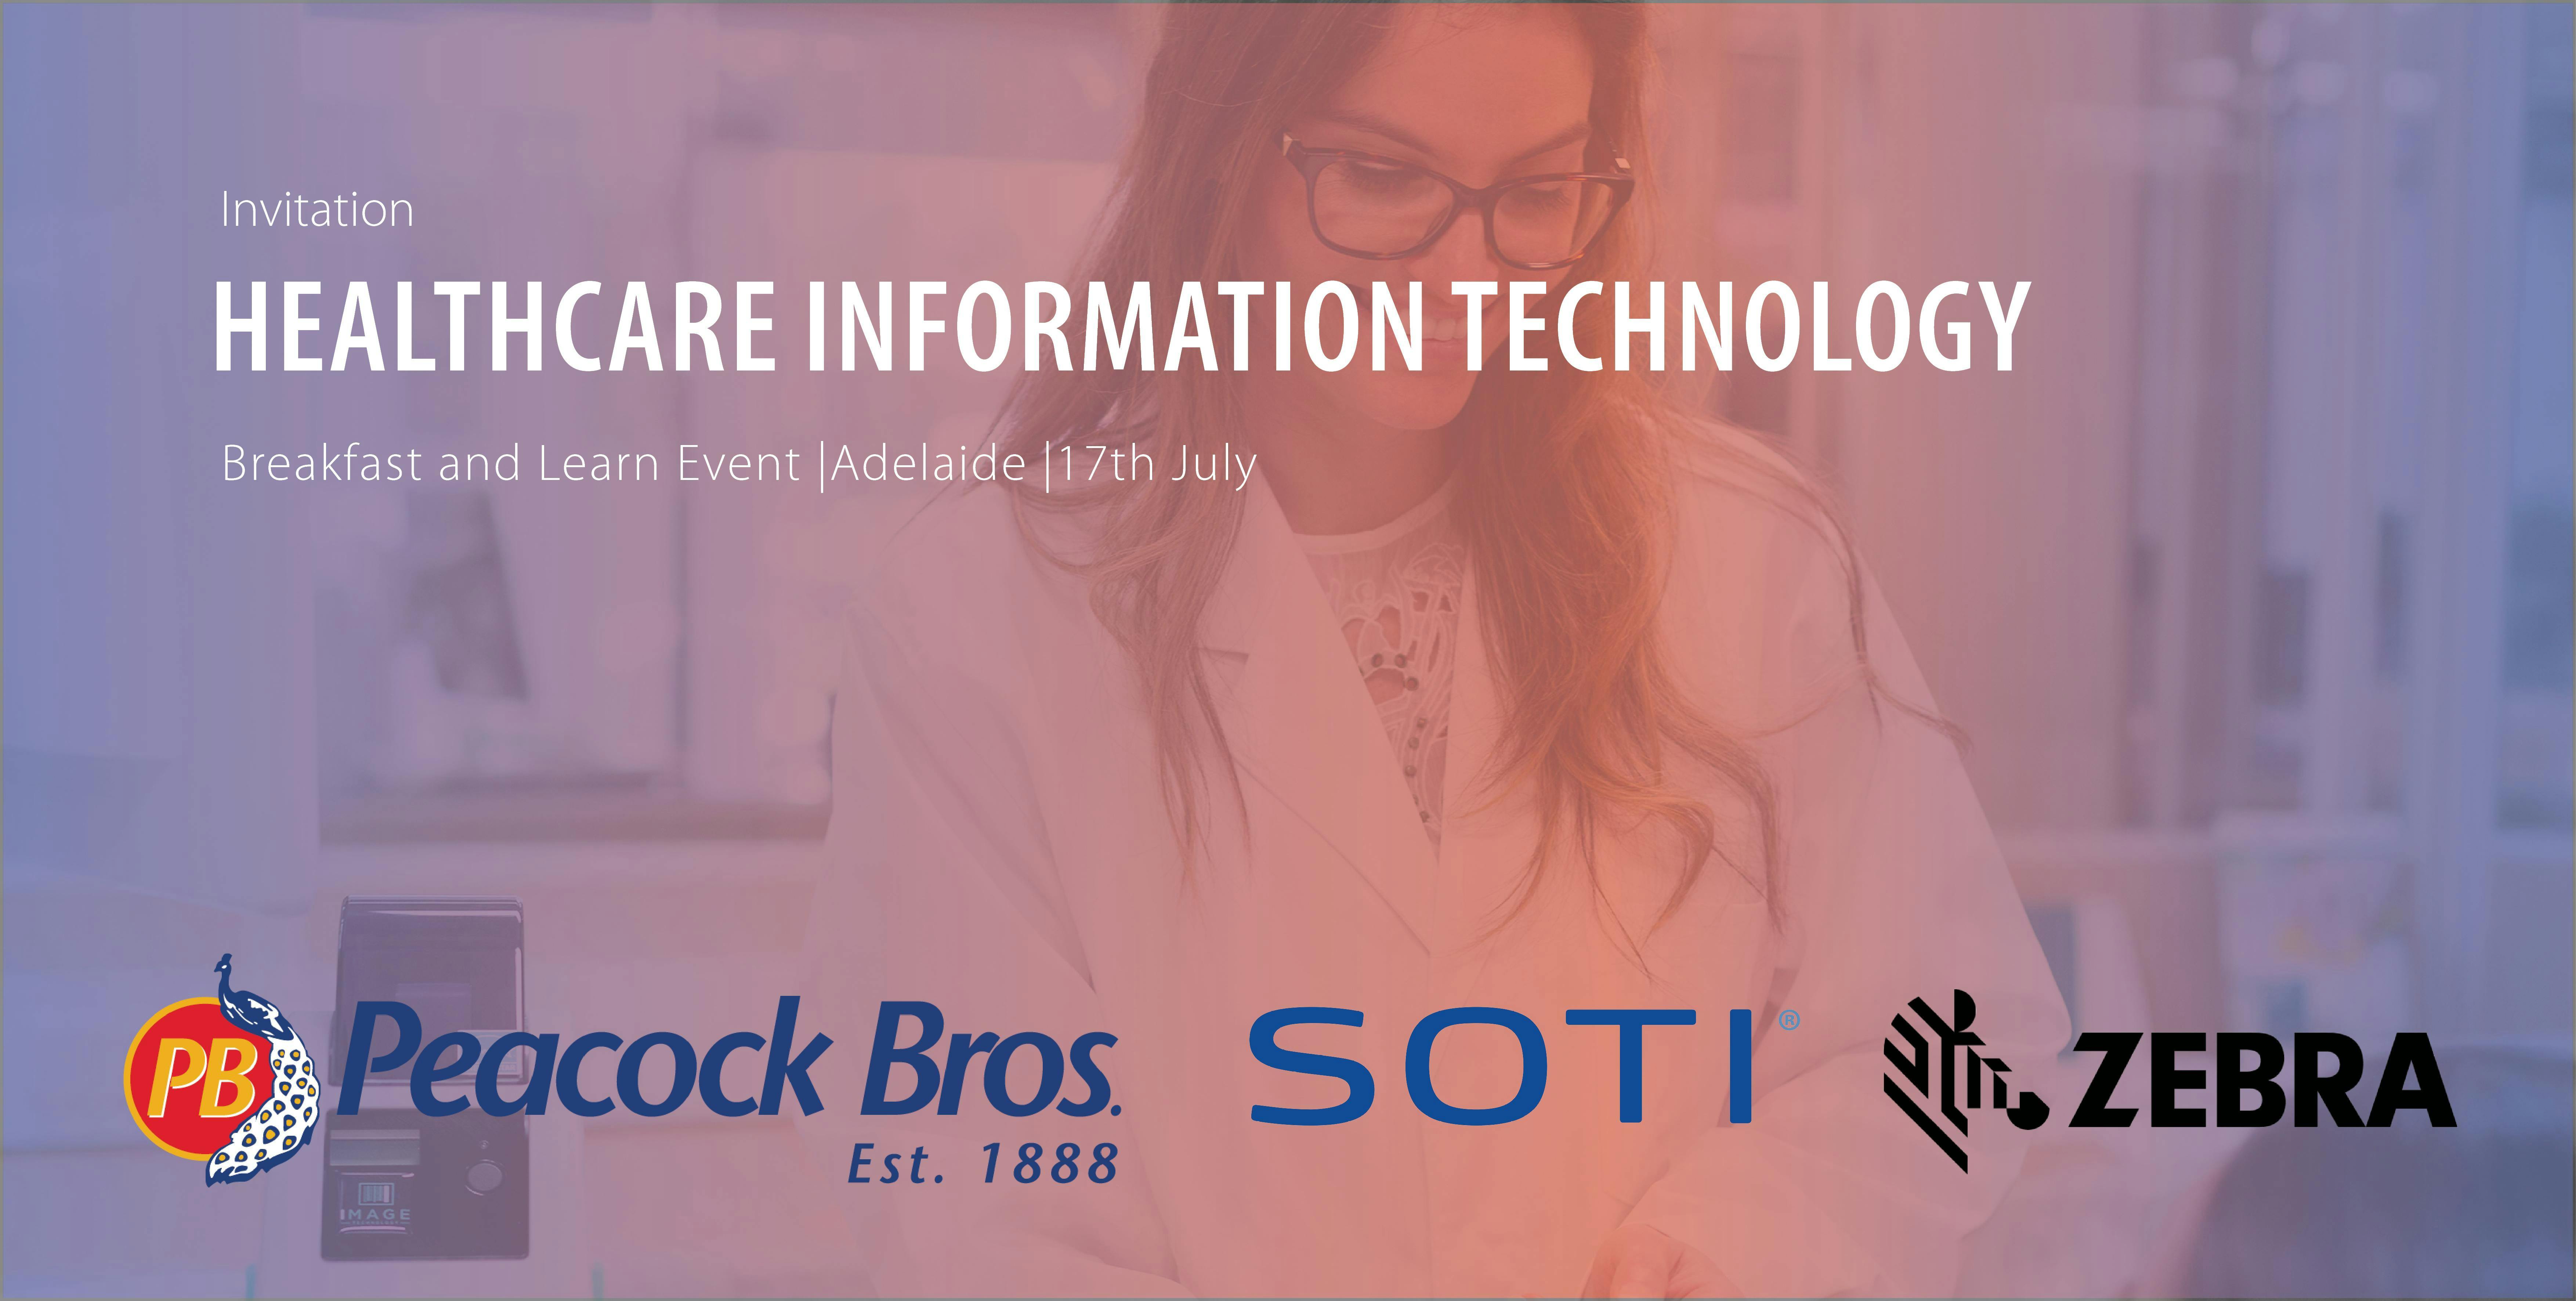  Healthcare Information Technology Breakfast presented by Peacock Bros., SOTI Inc. and Zebra Technologies